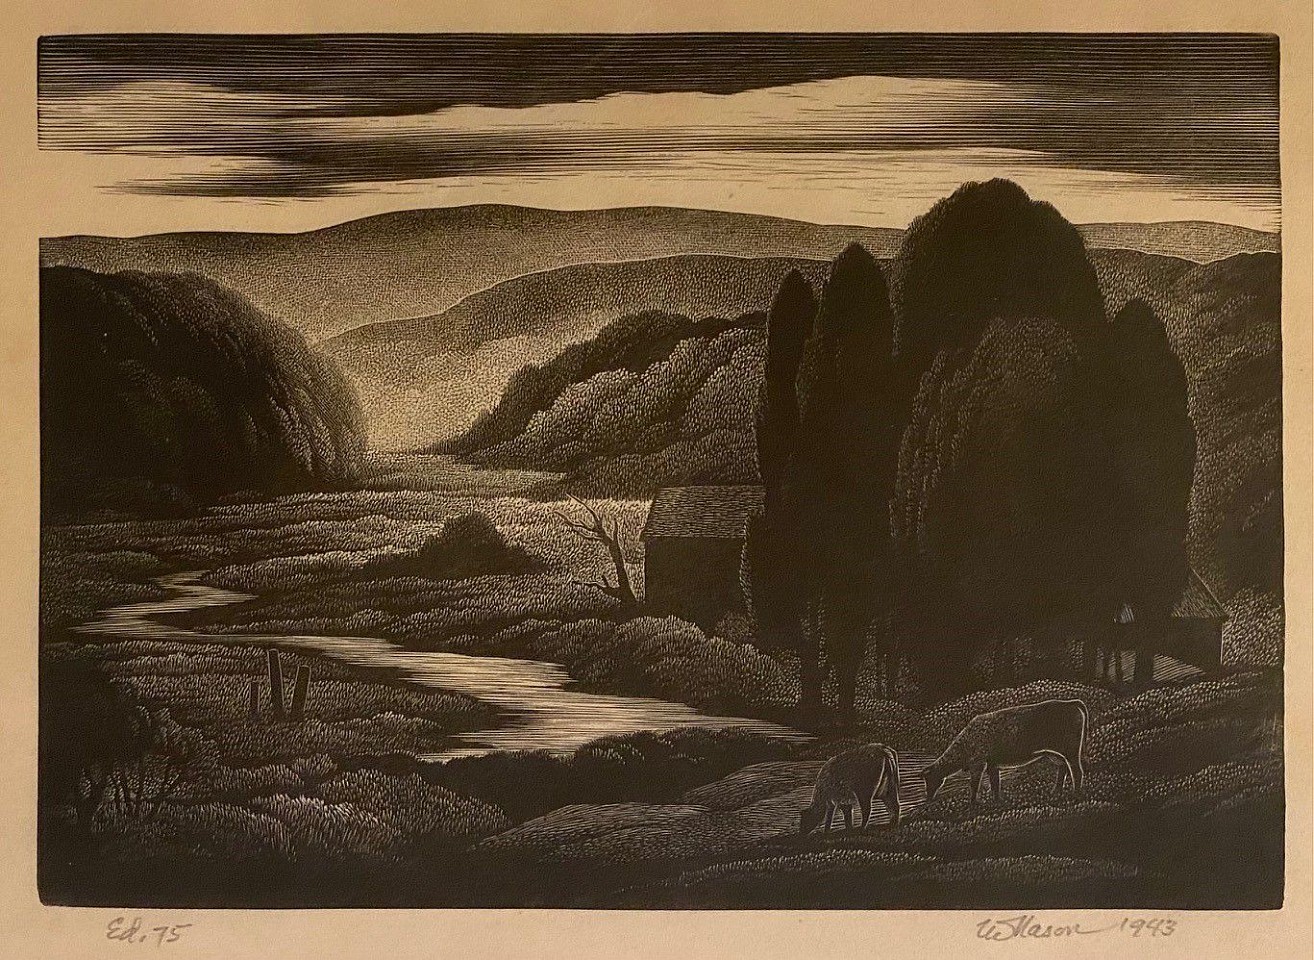 Thomas Willoughby Nason, Evening Mist, 1943
wood engraving on paper, 4 1/2"" x 6 1/4""
JCA 6634
$950